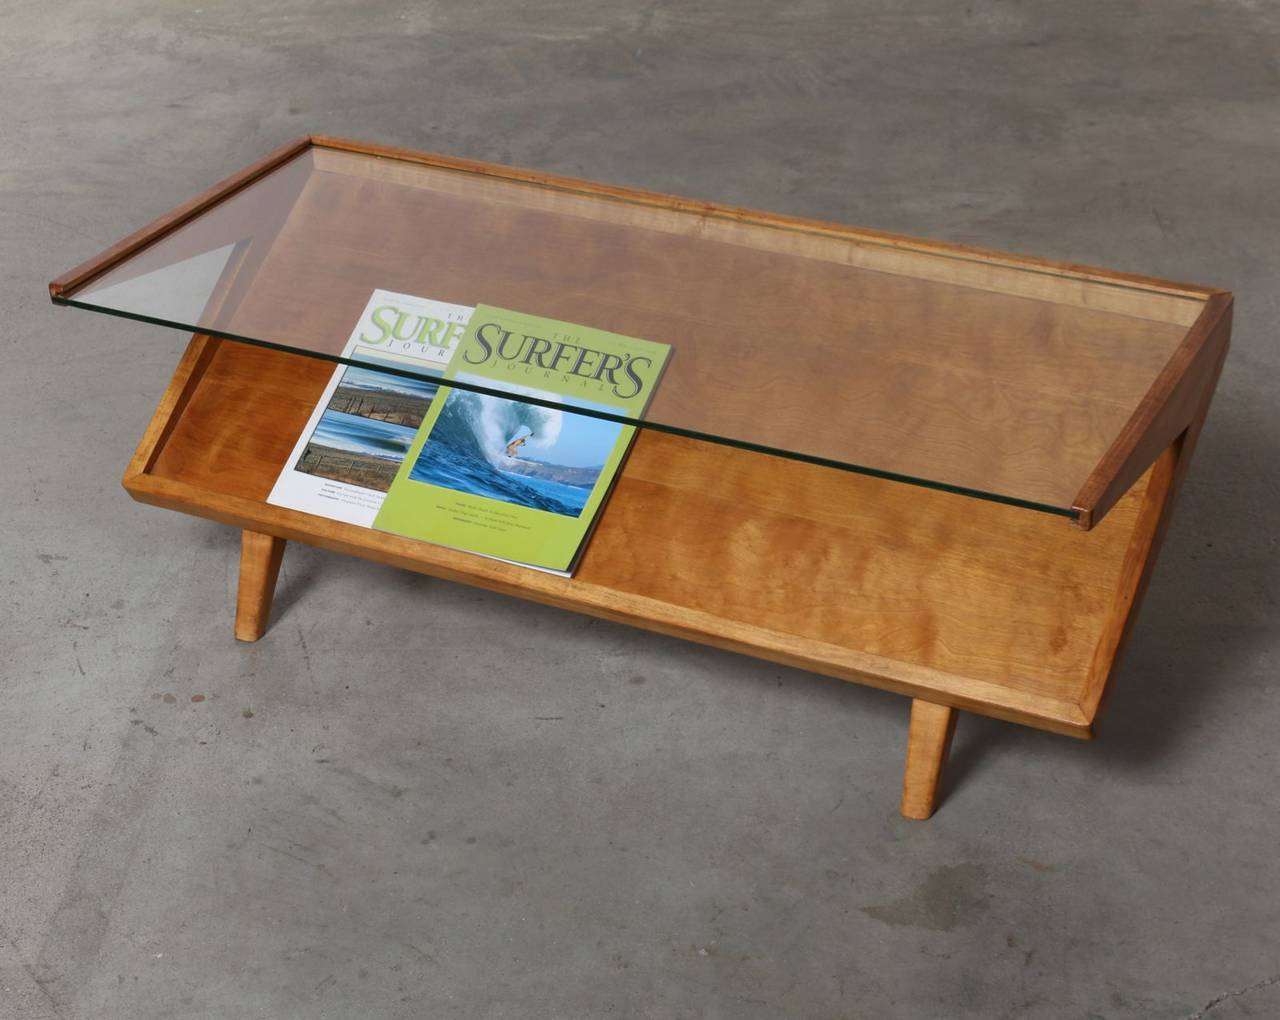 Designed by John Keal for Brown Saltman in the 1950's this sleek and shapely mid century coffee table allows viewable storage of magazines, newspapers or your favorite books below a glass top.  Boomerang shaped sides add wonderful interest and